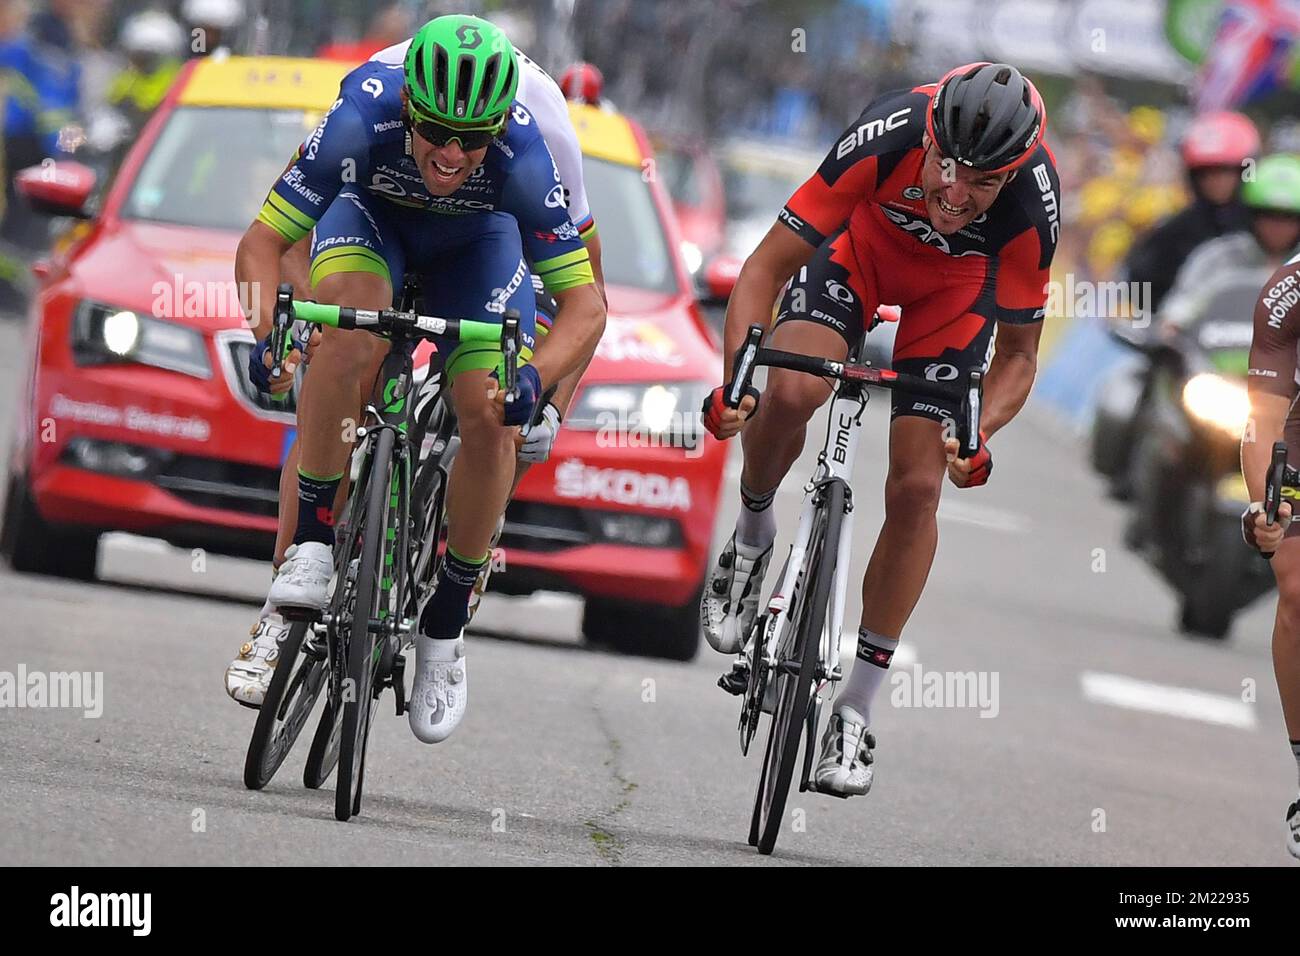 Australian Michael Matthews of Orica GreenEDGE and Belgian Greg Van Avermaet of BMC Racing Team sprint for the finish of the tenth stage of the 103rd edition of the Tour de France cycling race, 197km from Escaldes-Engordany, Andorra to Revel, France on Tuesday 12 July 2016.  Stock Photo